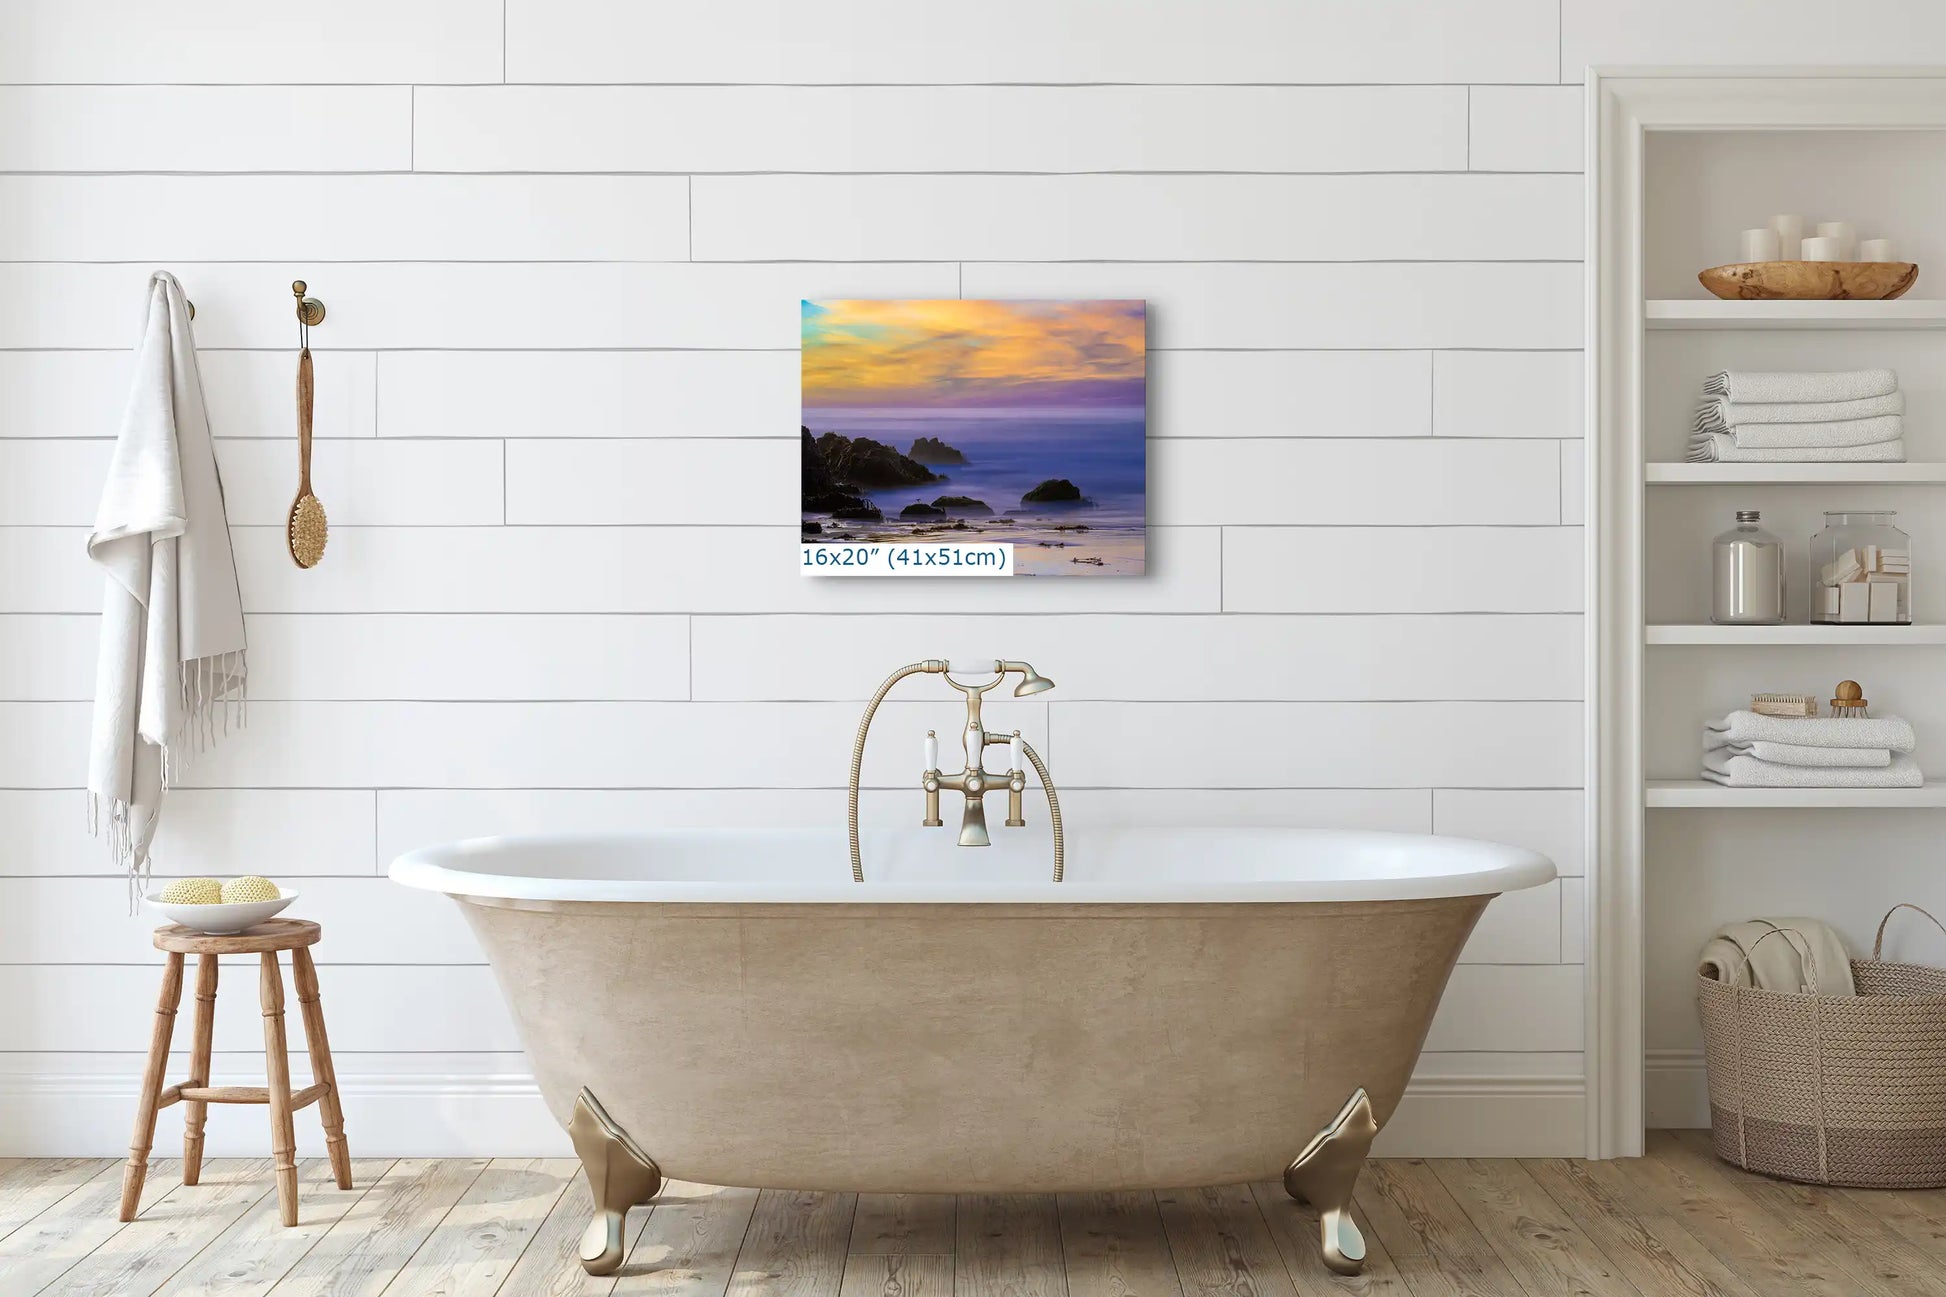 Bathroom decor with a 16x20 wall art of Big Sur's Purple Sand Beach at sunset, infusing the space with the coastline's serene beauty.